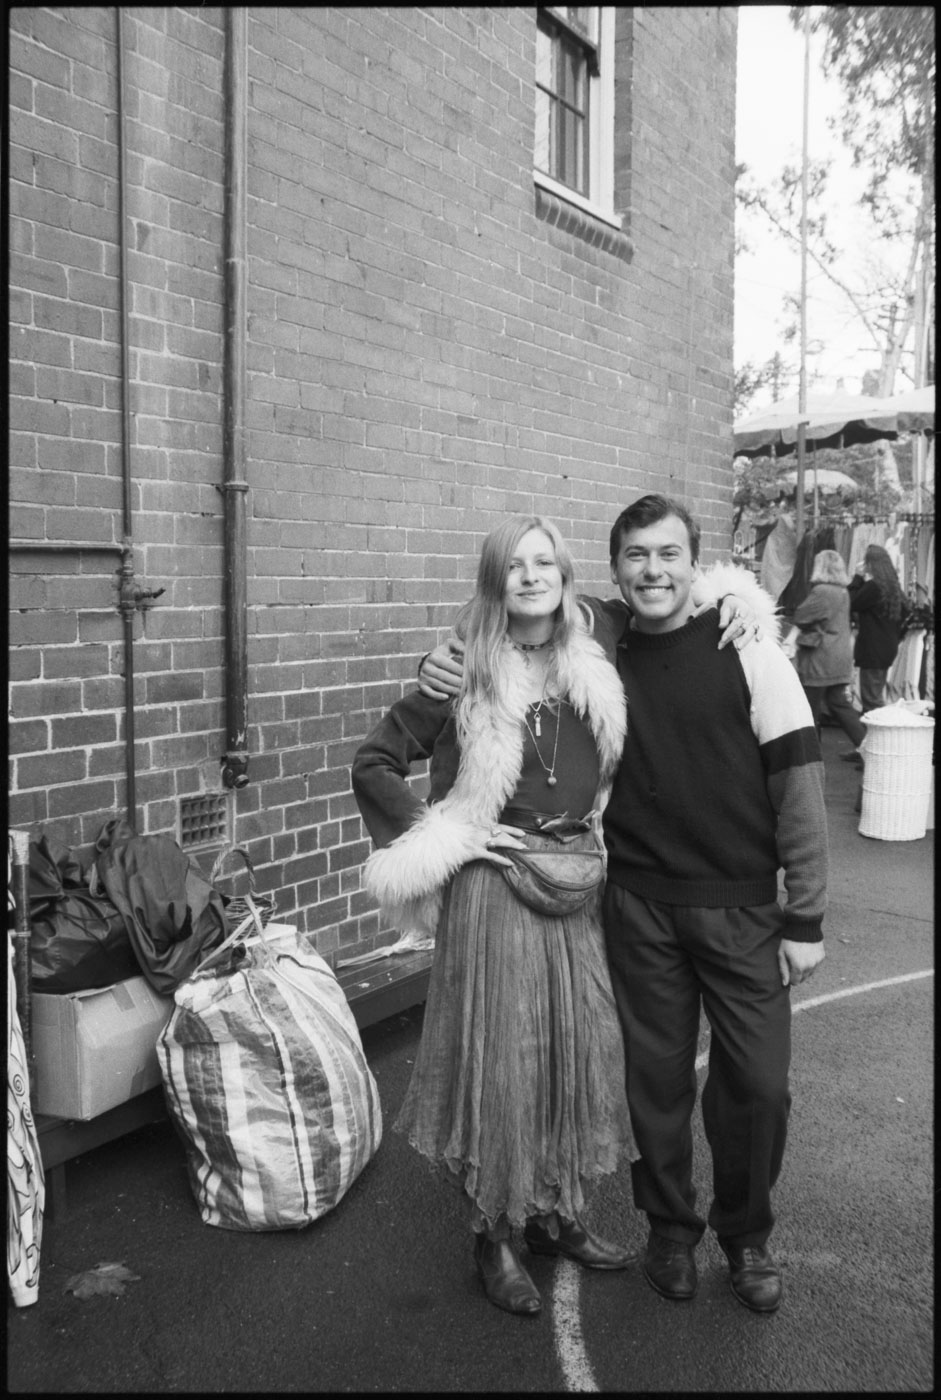 Emma Wardle (ethnic jewellery) and her friend Sean Lewis before setting up | 1992 | R23-18